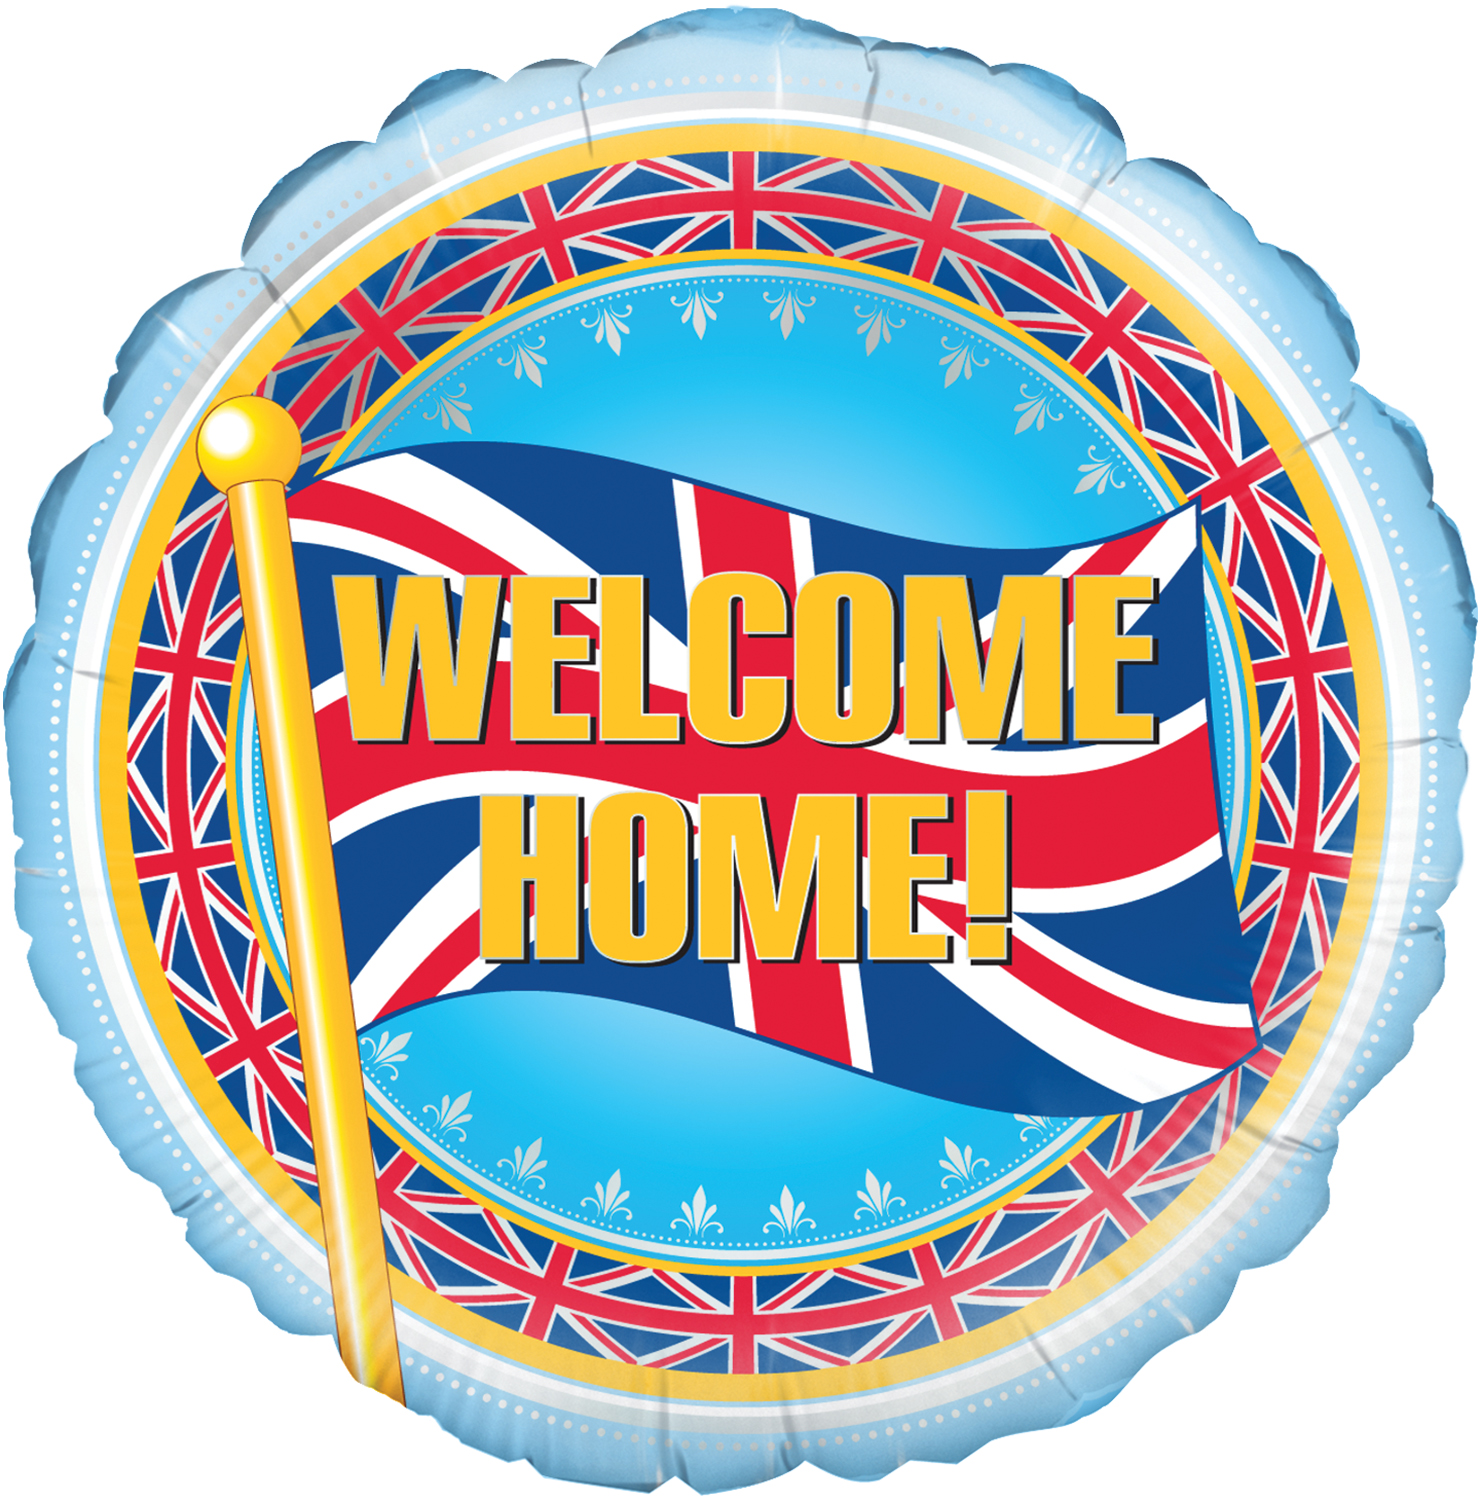 18" Welcome Home Oaktree Foil Balloon